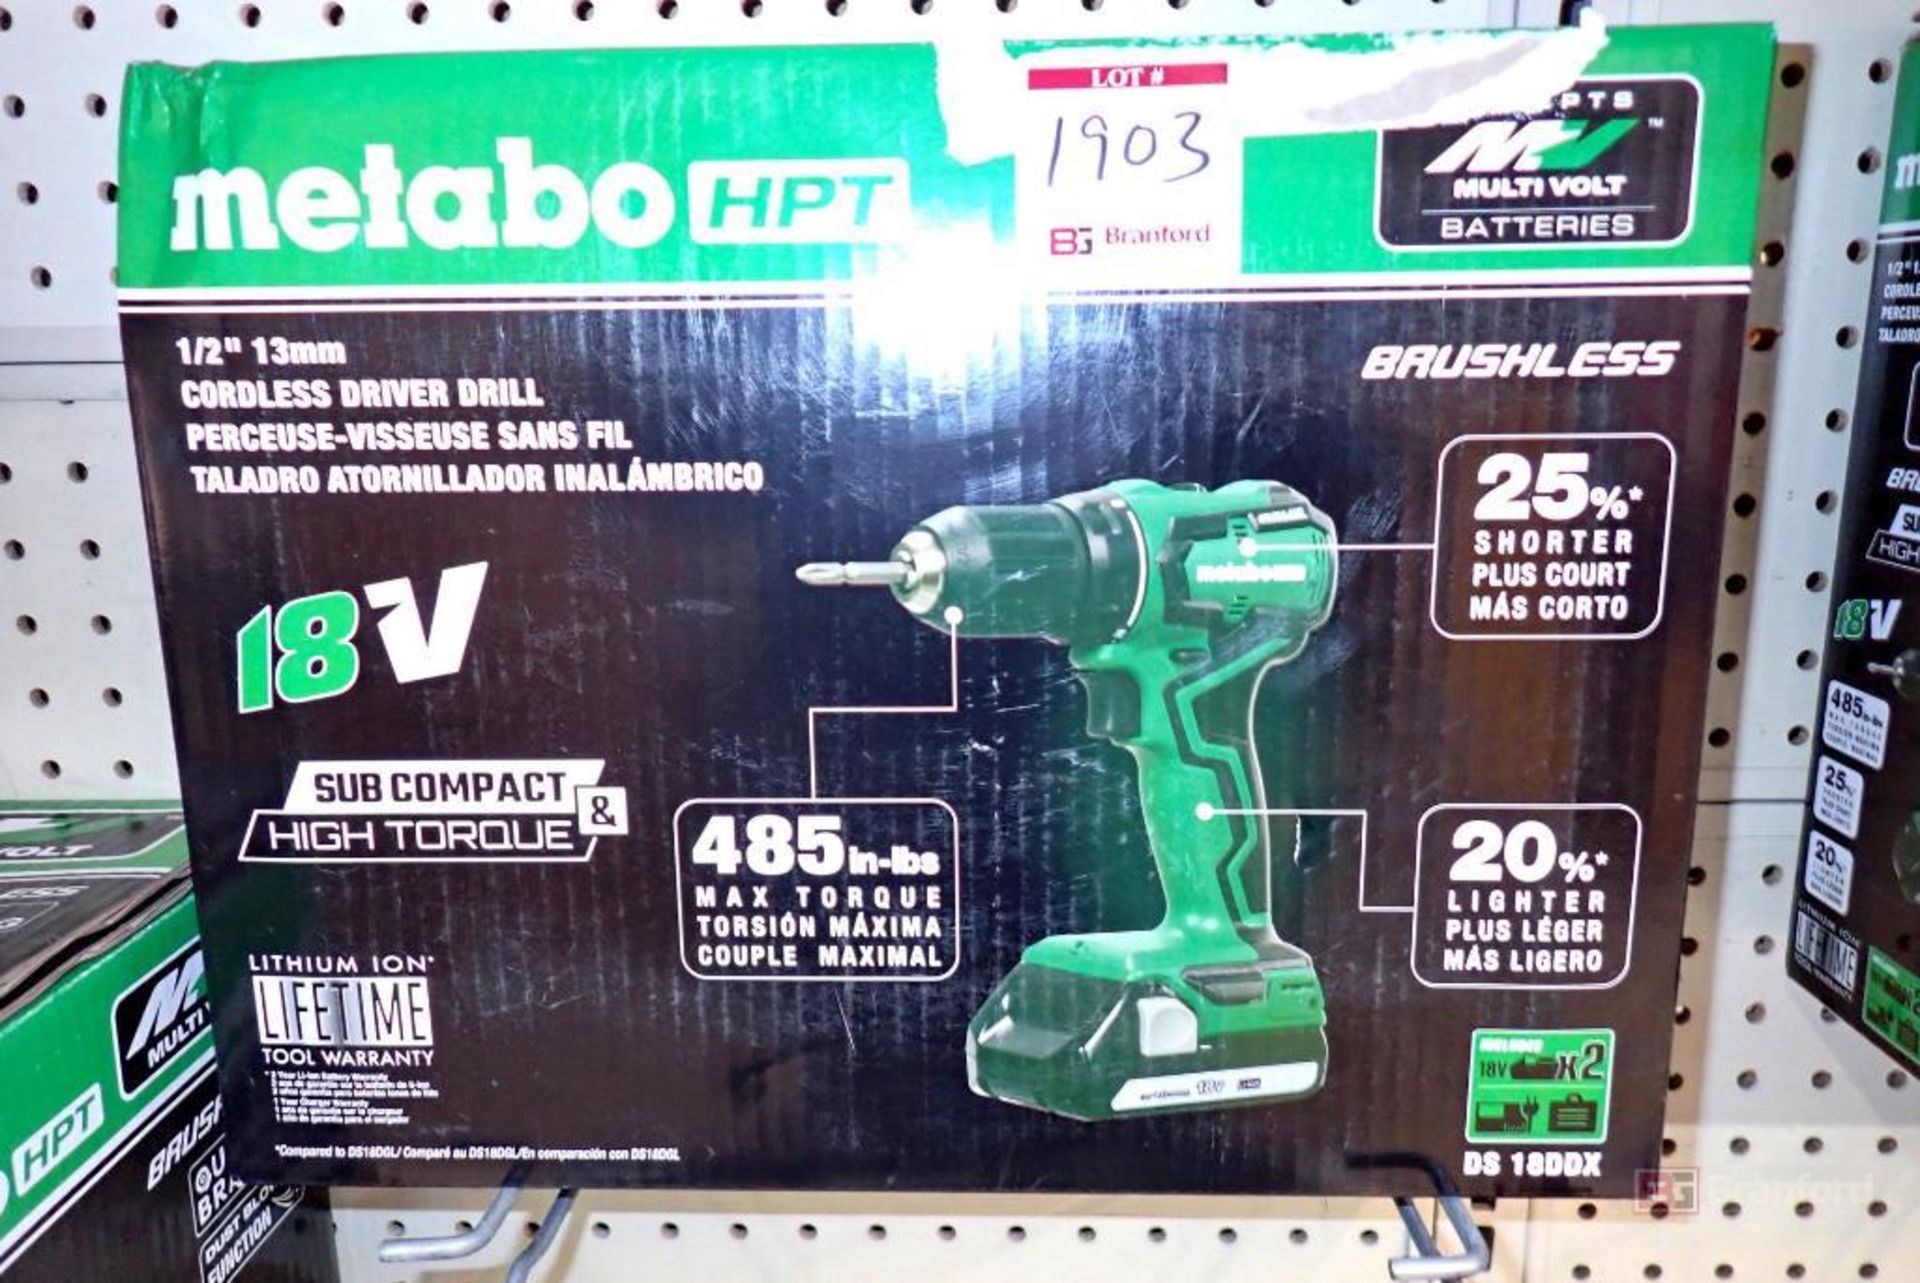 Metabo DS 18DDX Brushless 1/2" 13mm Cordless Driver Drill - Image 2 of 4